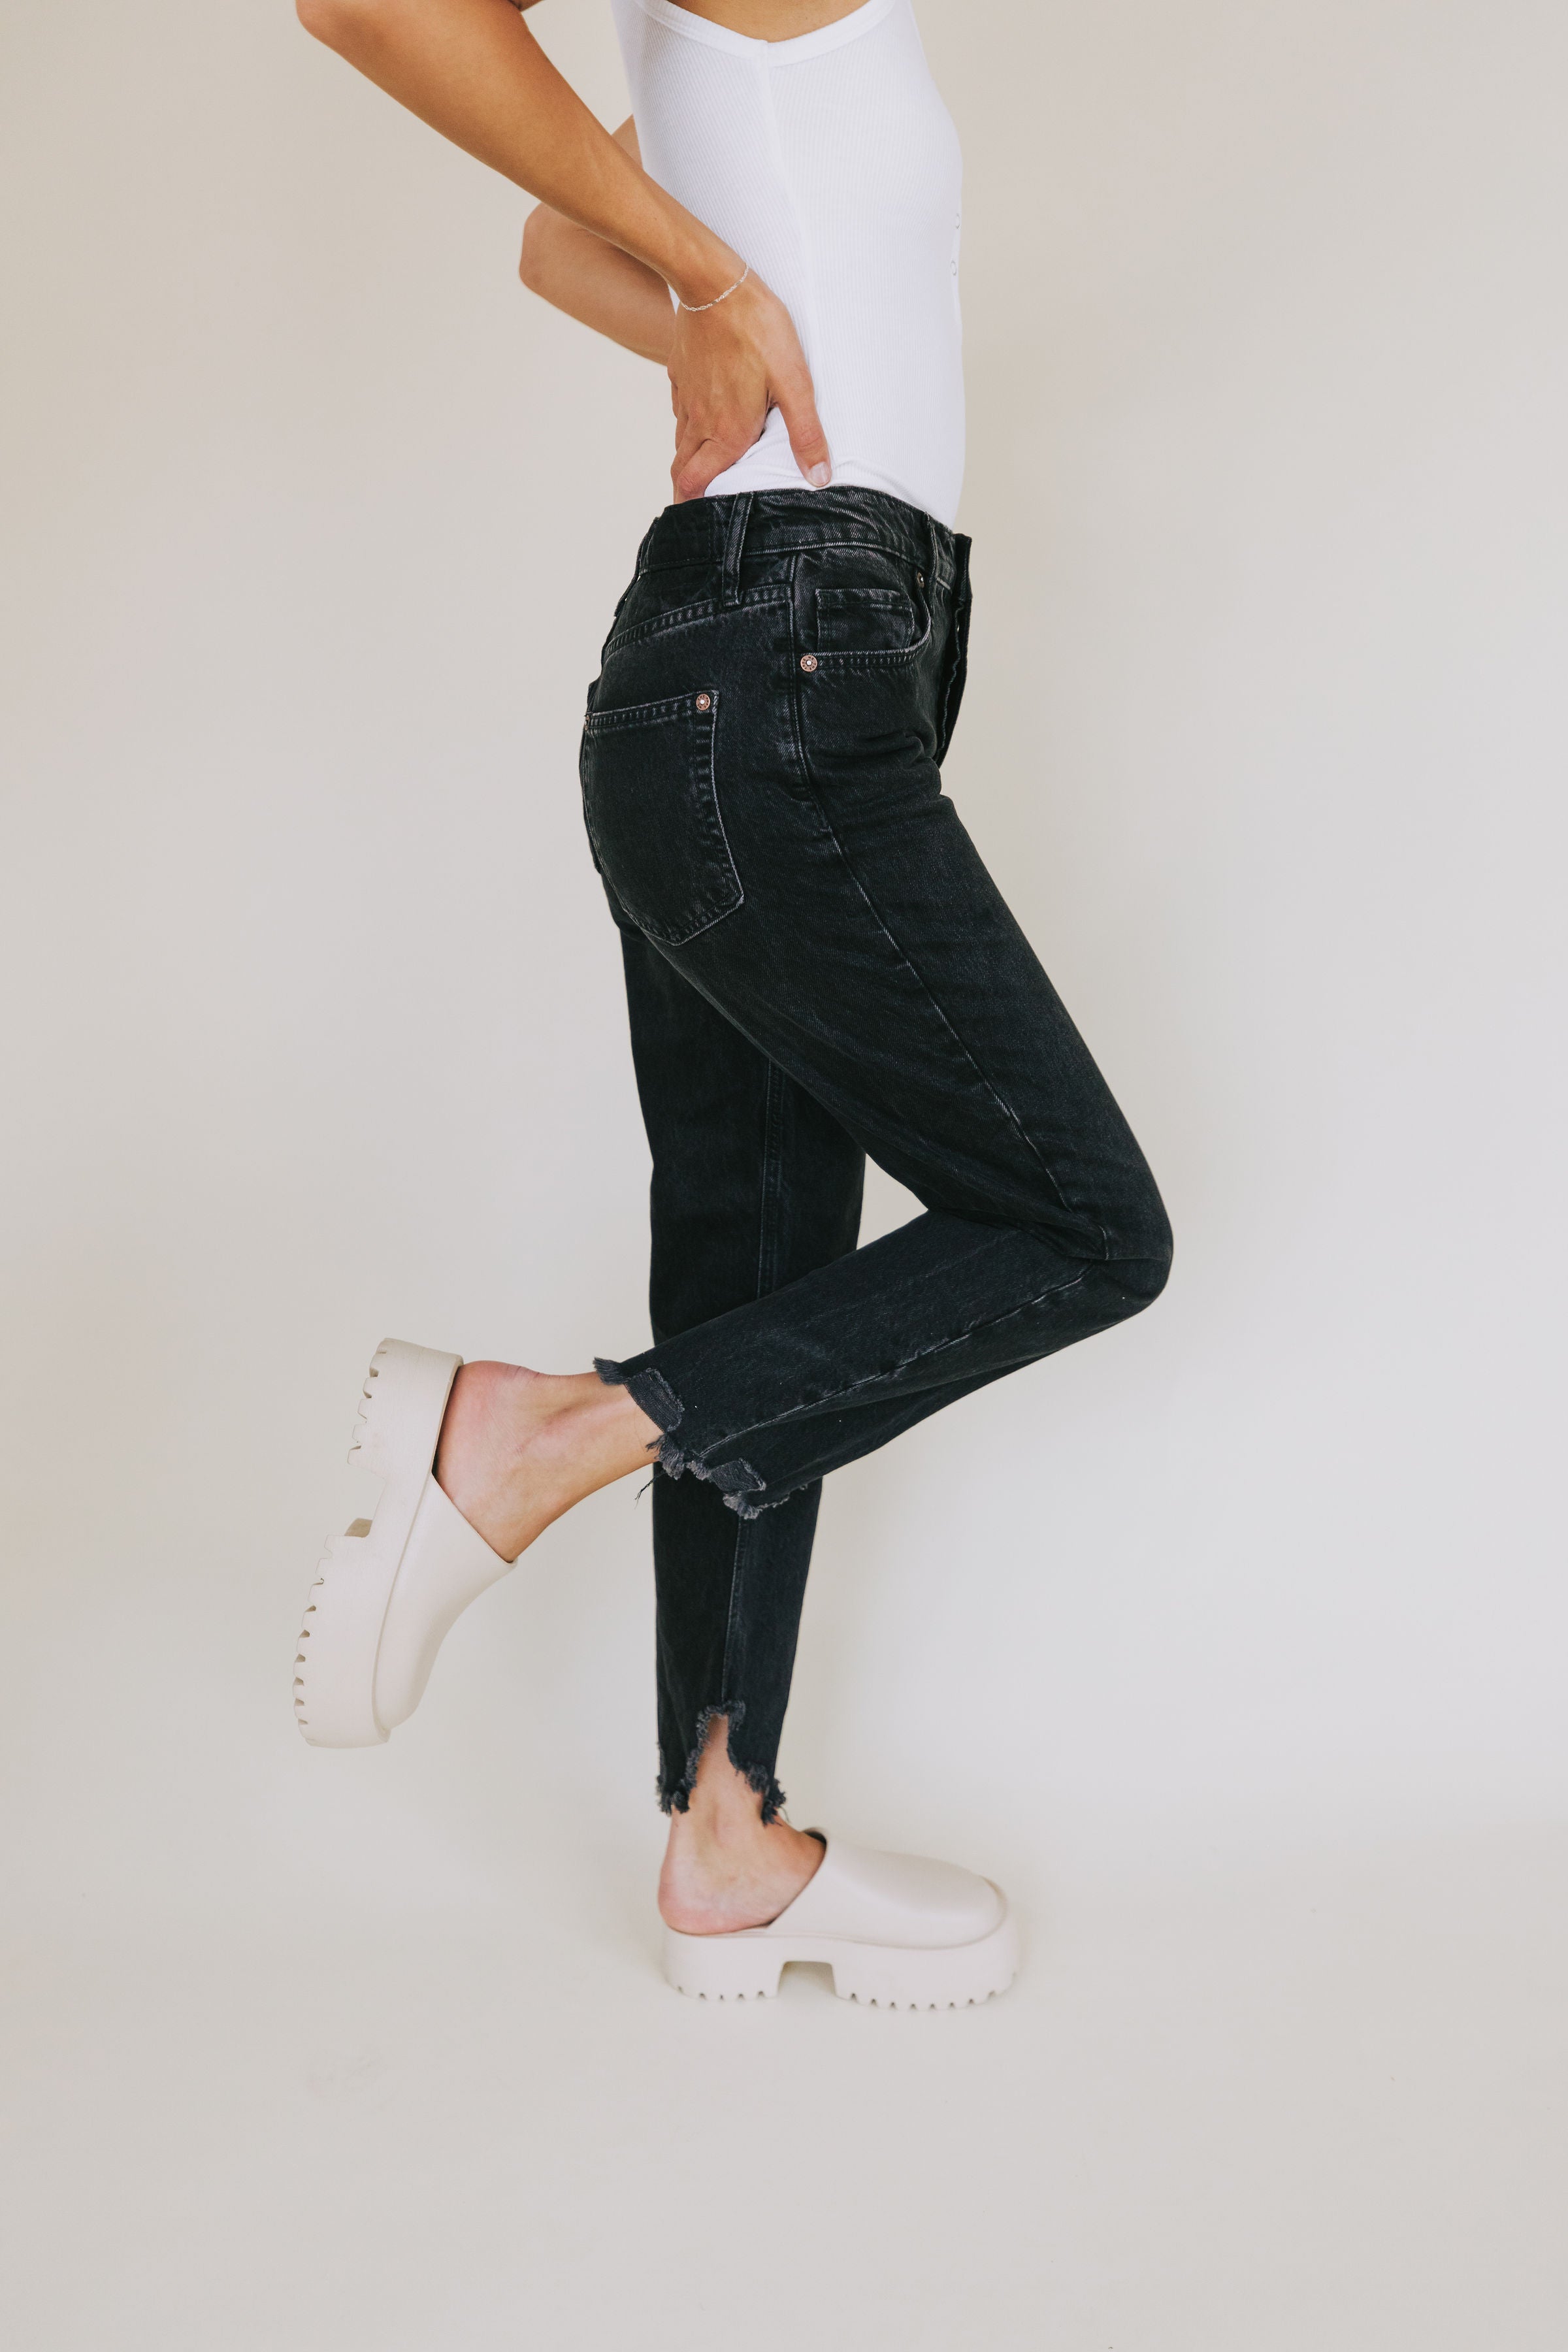 FREE PEOPLE - Tapered Baggy Boyfriend Jeans